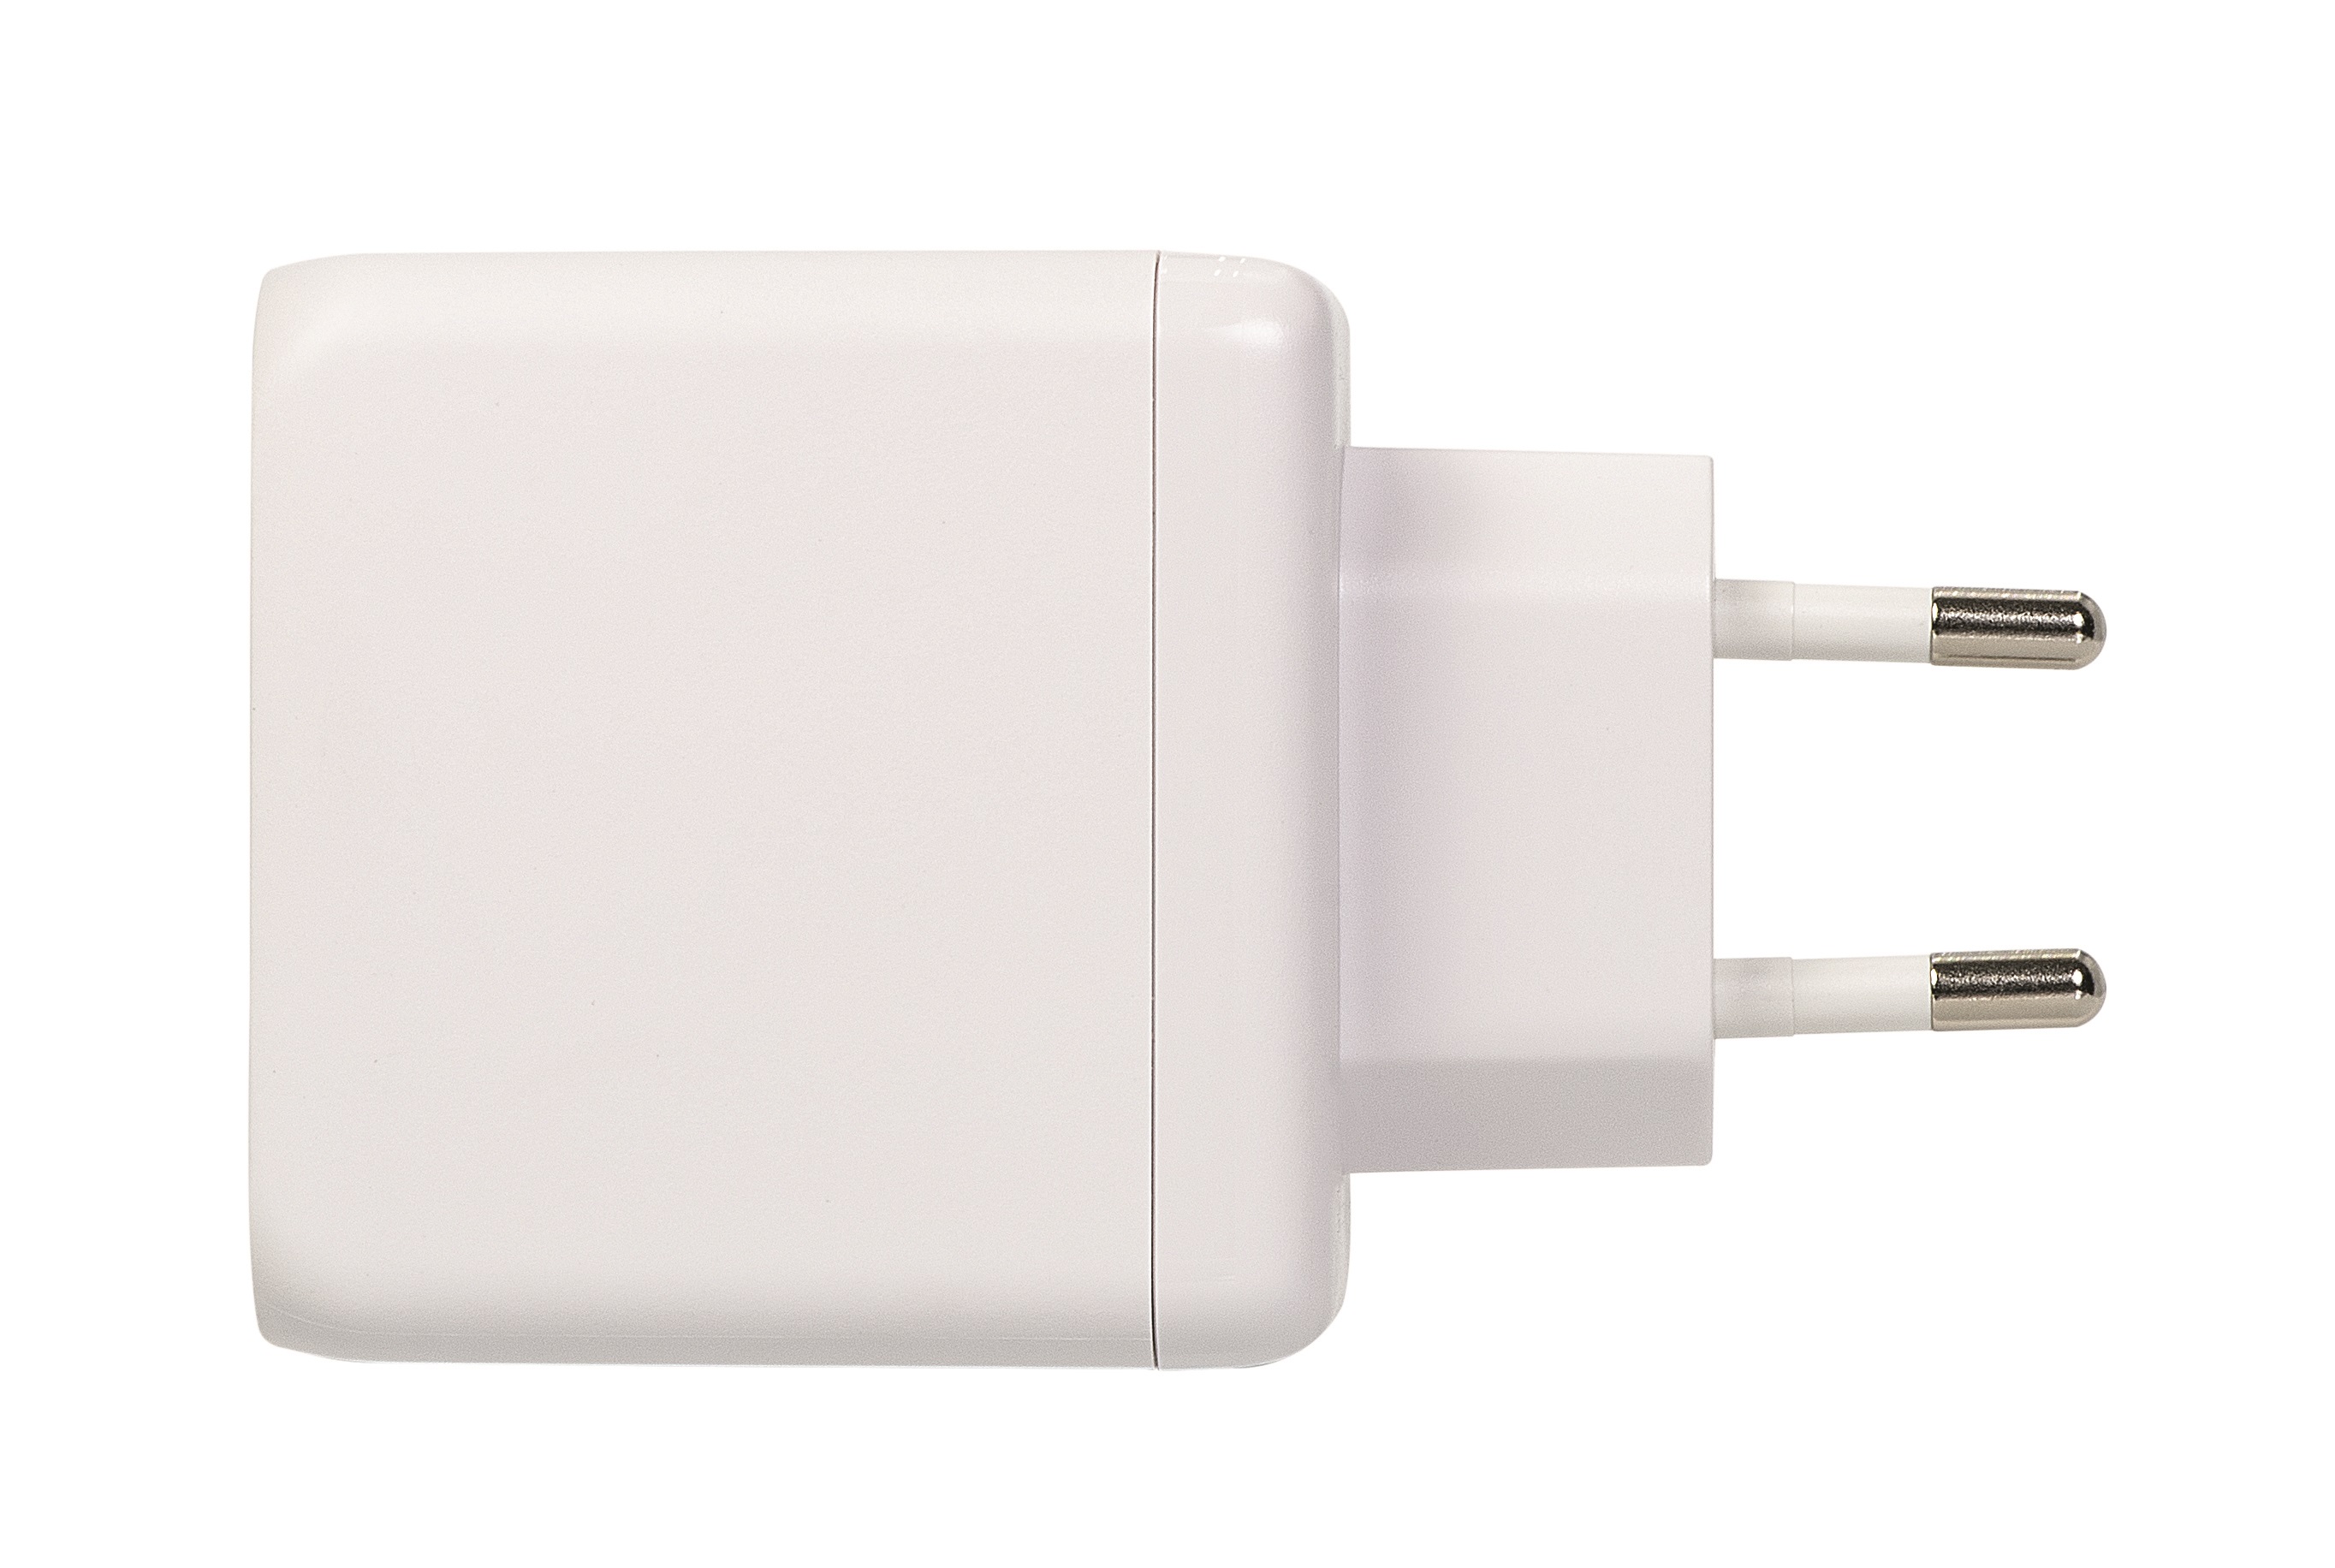 POWER CUBE 65 GaN Wall Charger